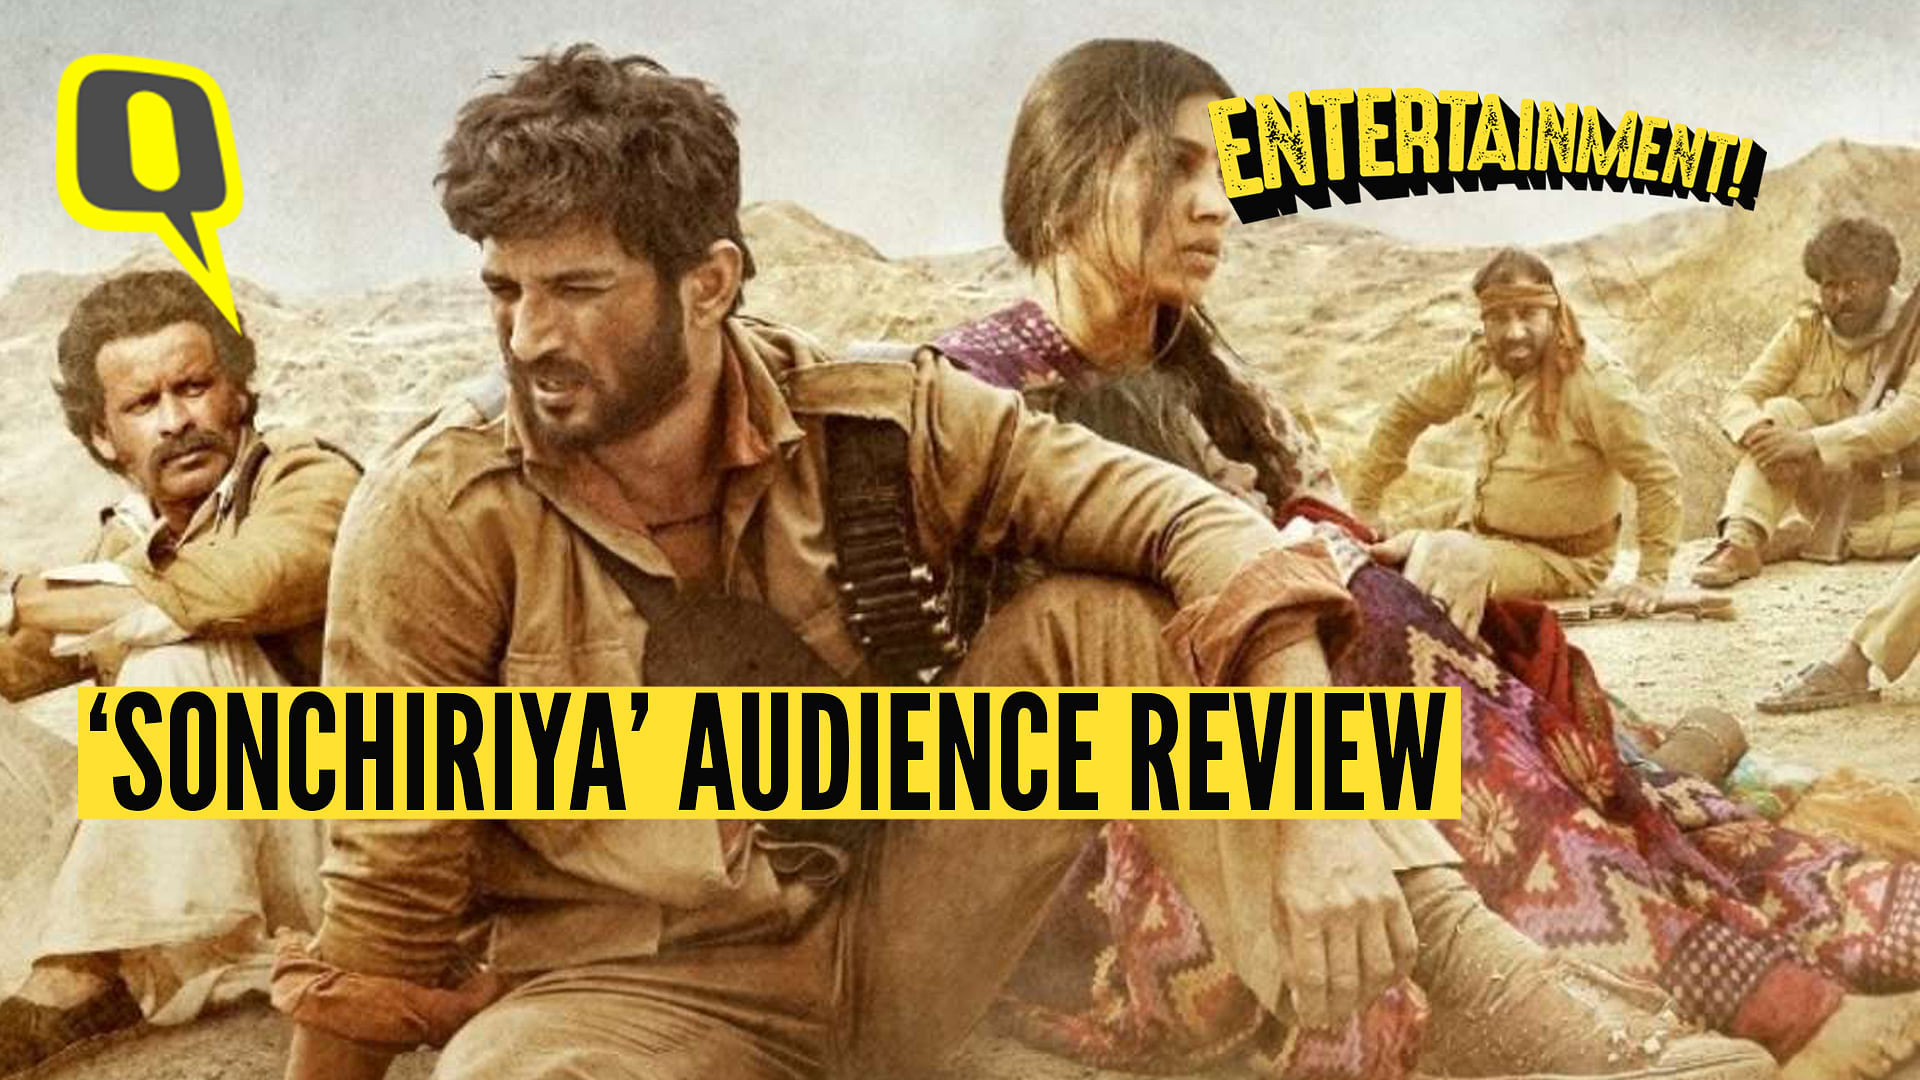 Sonchiriya box office collection day 2: Sushant Singh Rajput's dacoit drama  FAILS to grow, earns Rs 2.70 crore - Bollywood News & Gossip, Movie  Reviews, Trailers & Videos at Bollywoodlife.com